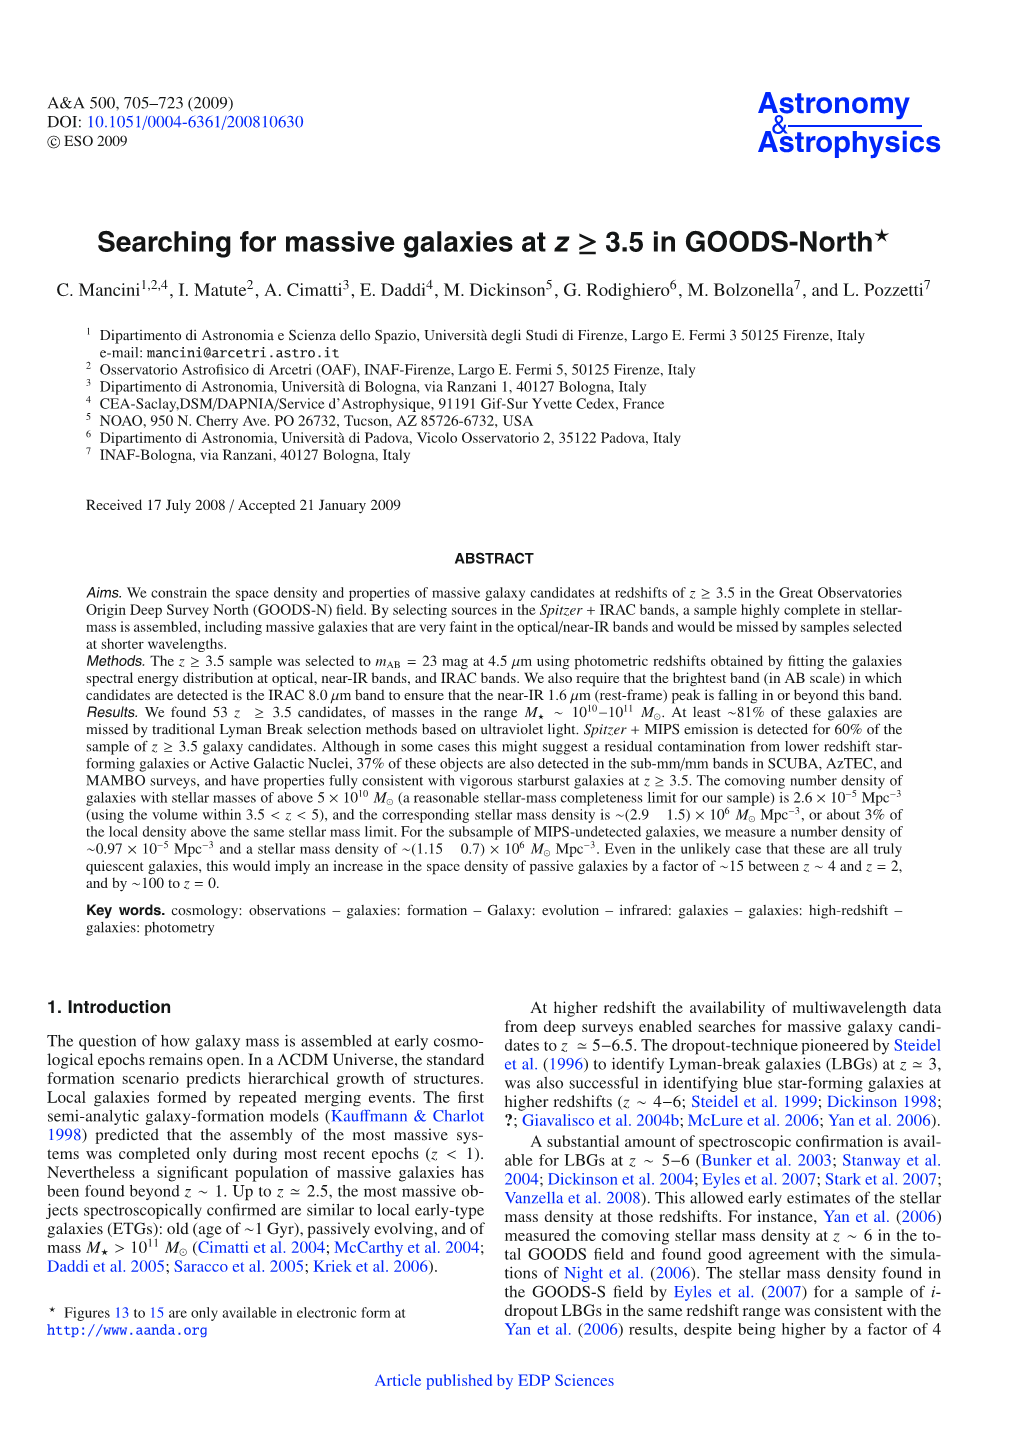 Searching for Massive Galaxies at Z ≥ 3.5 in GOODS-North